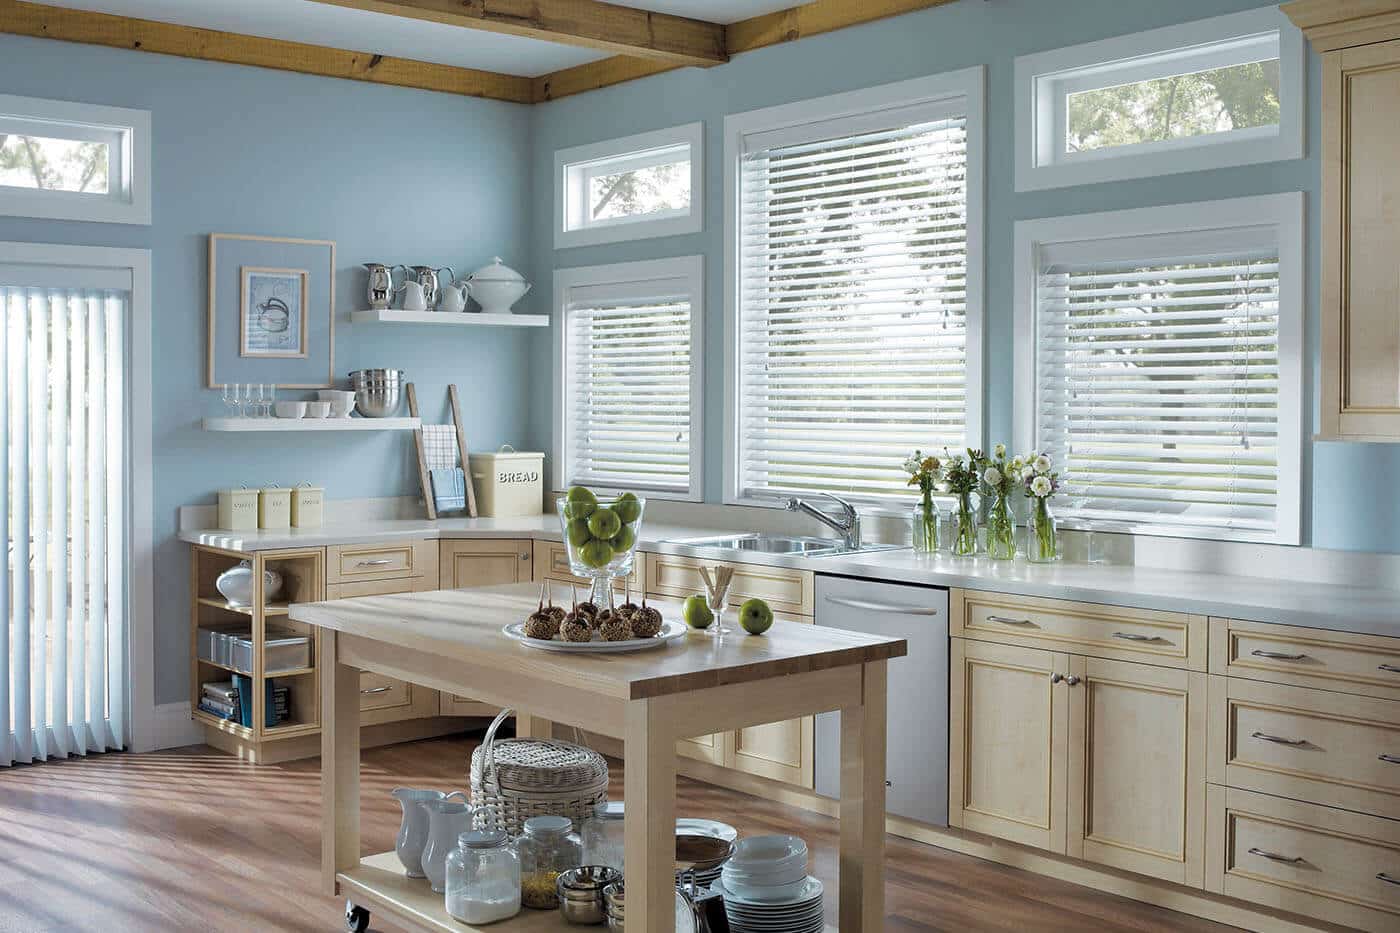 Custom made Timber Venetian Blinds in country woody kitchen. Available in Basswood, Pheonixwood and Western Red Cedar by Luxaflex. Made In Australia.